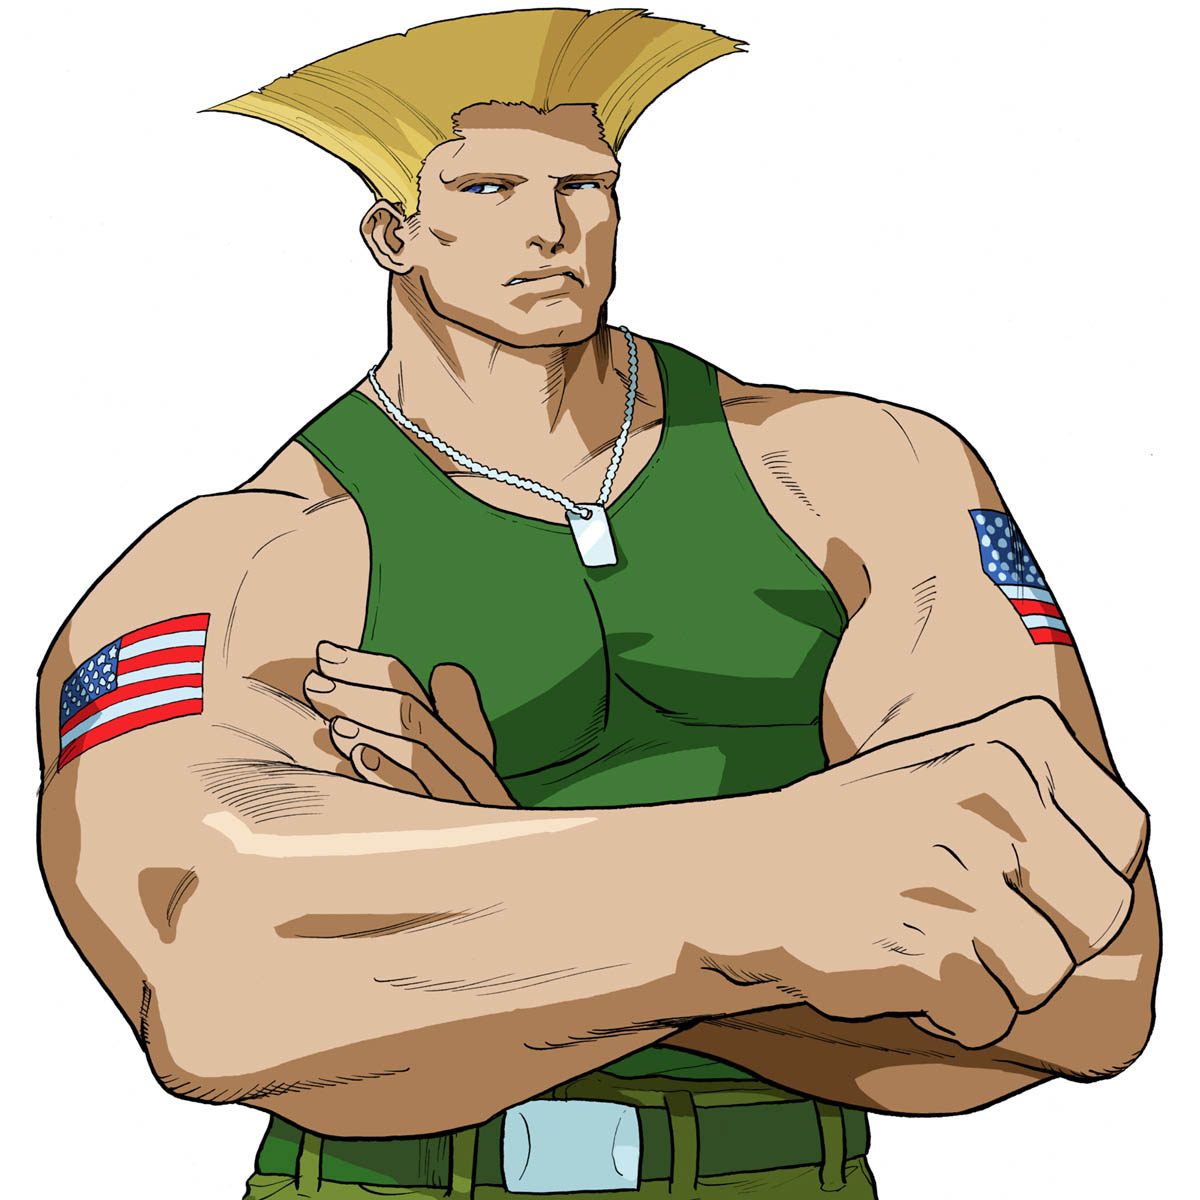 Guile (Street Fighter) - Characters & Art - Capcom vs. SNK